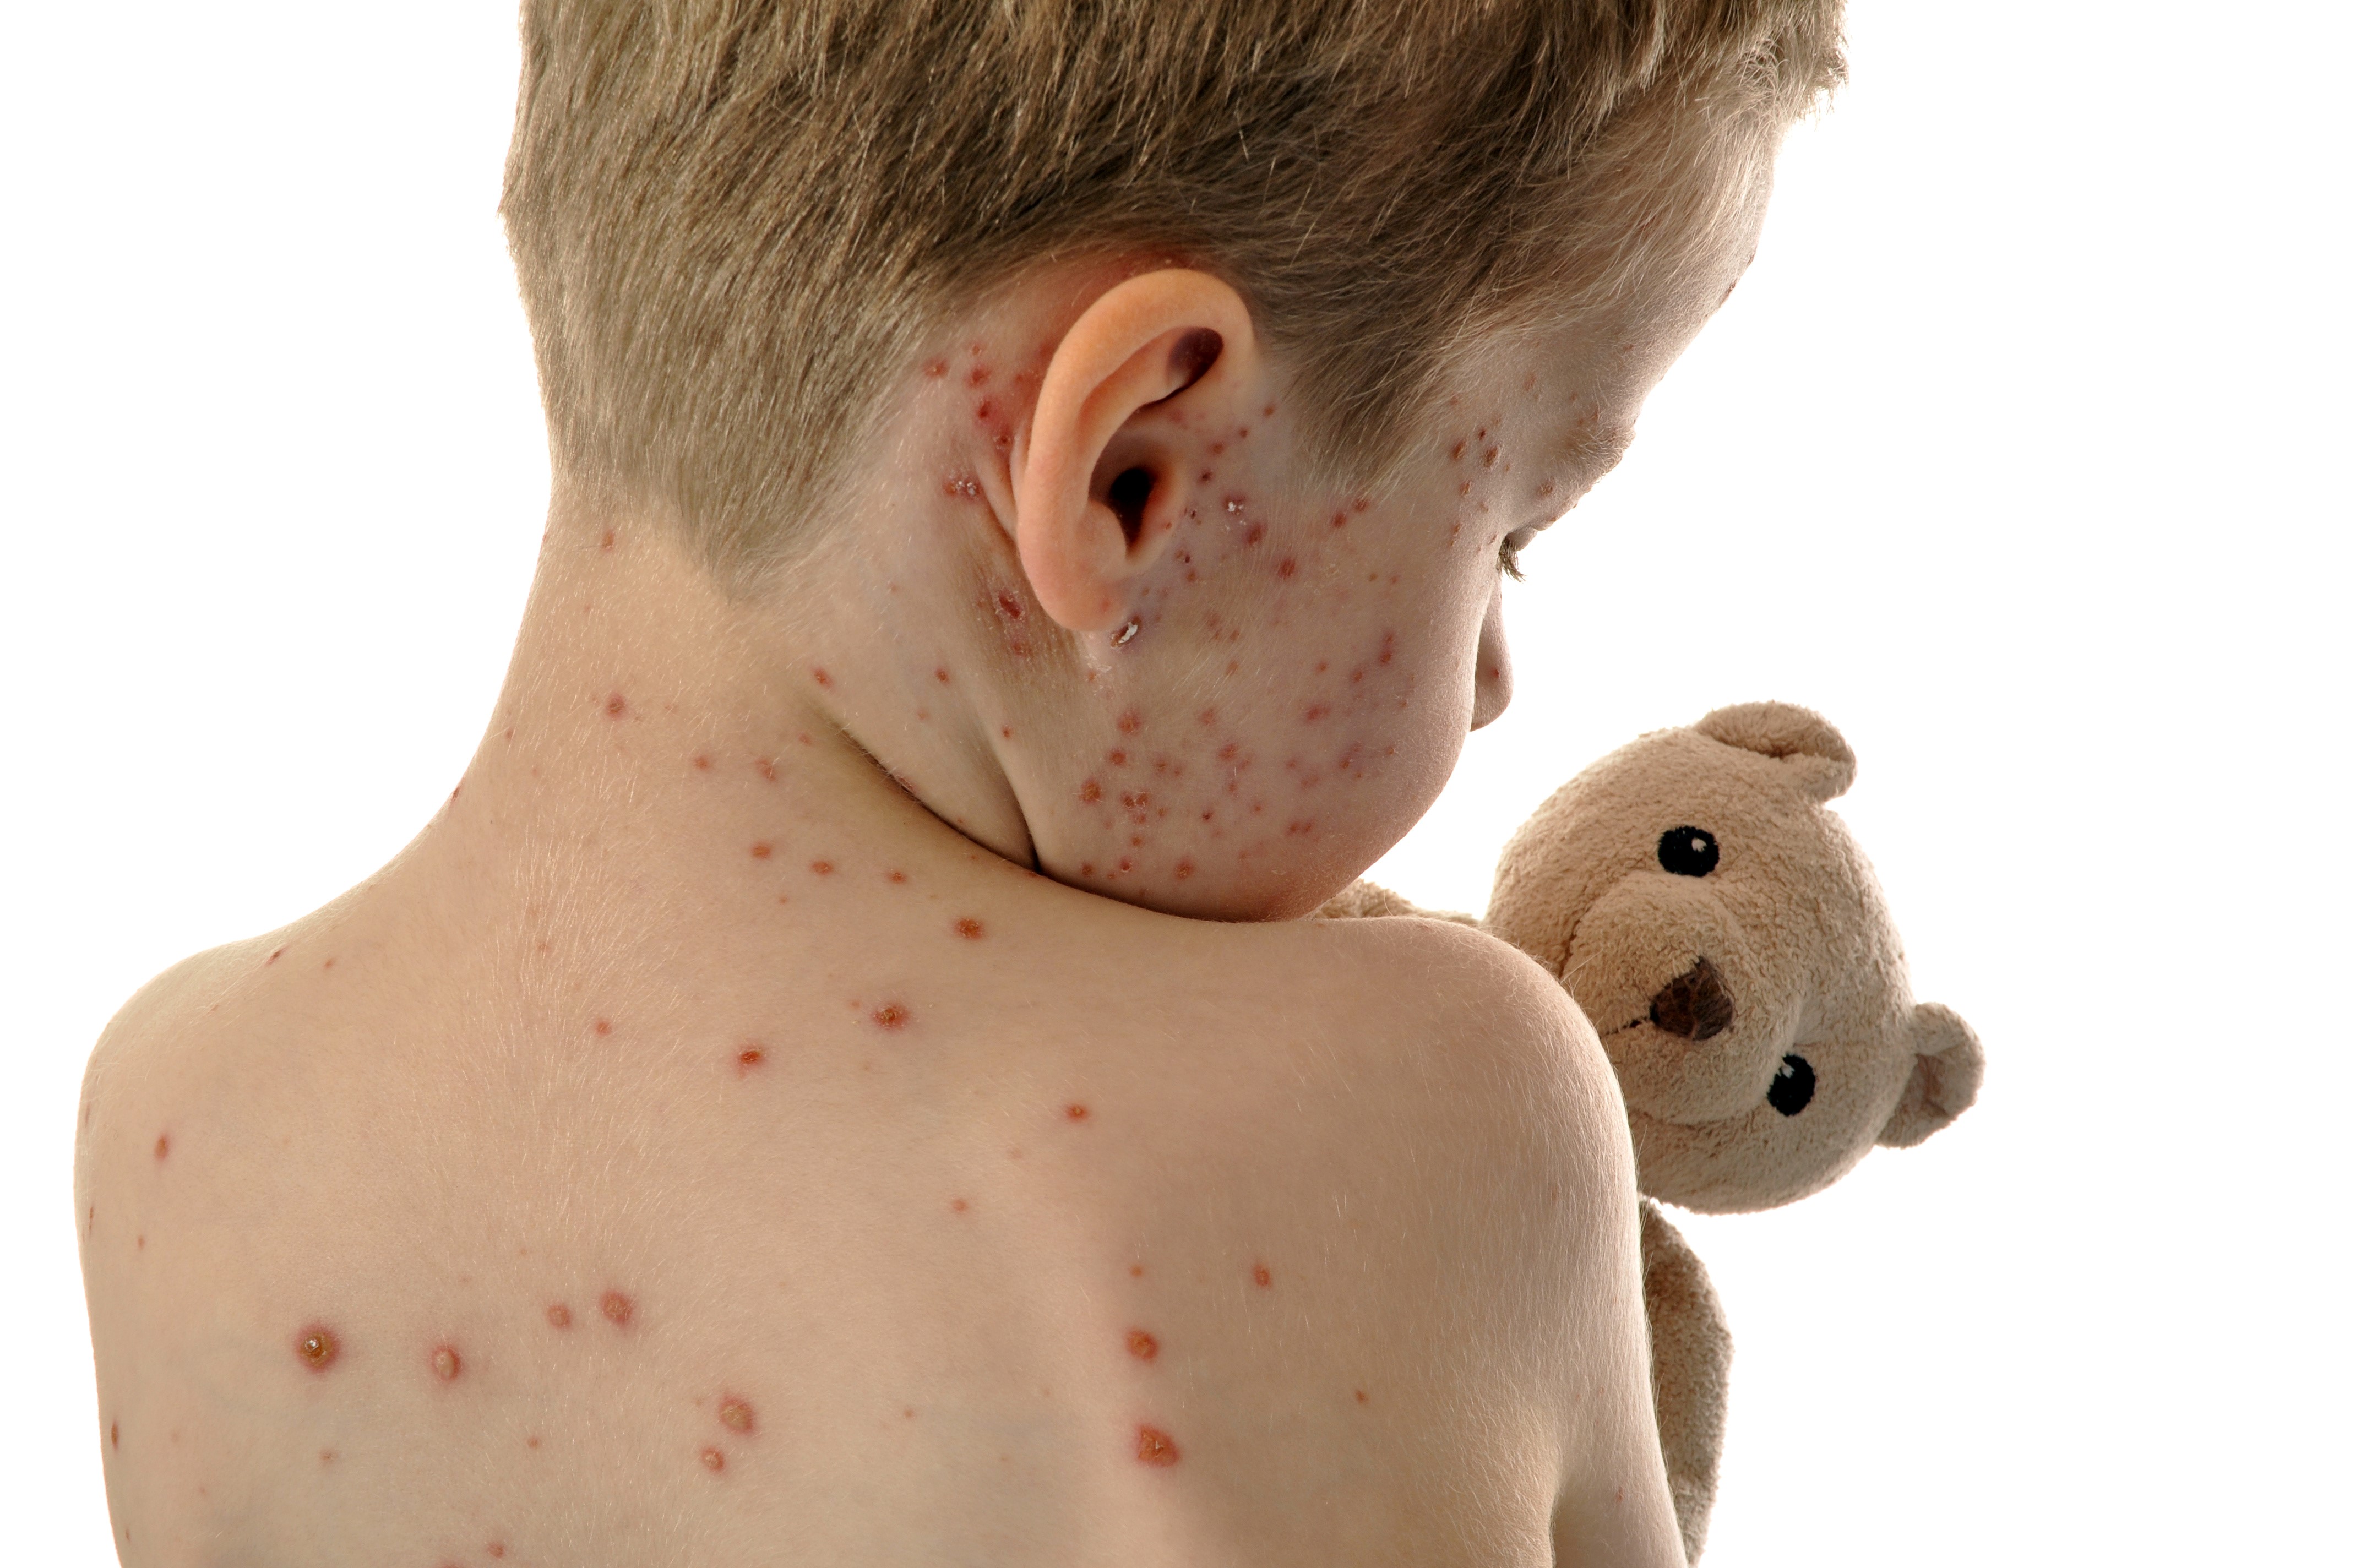 WHO Warns Of Rising Spread Of Measles